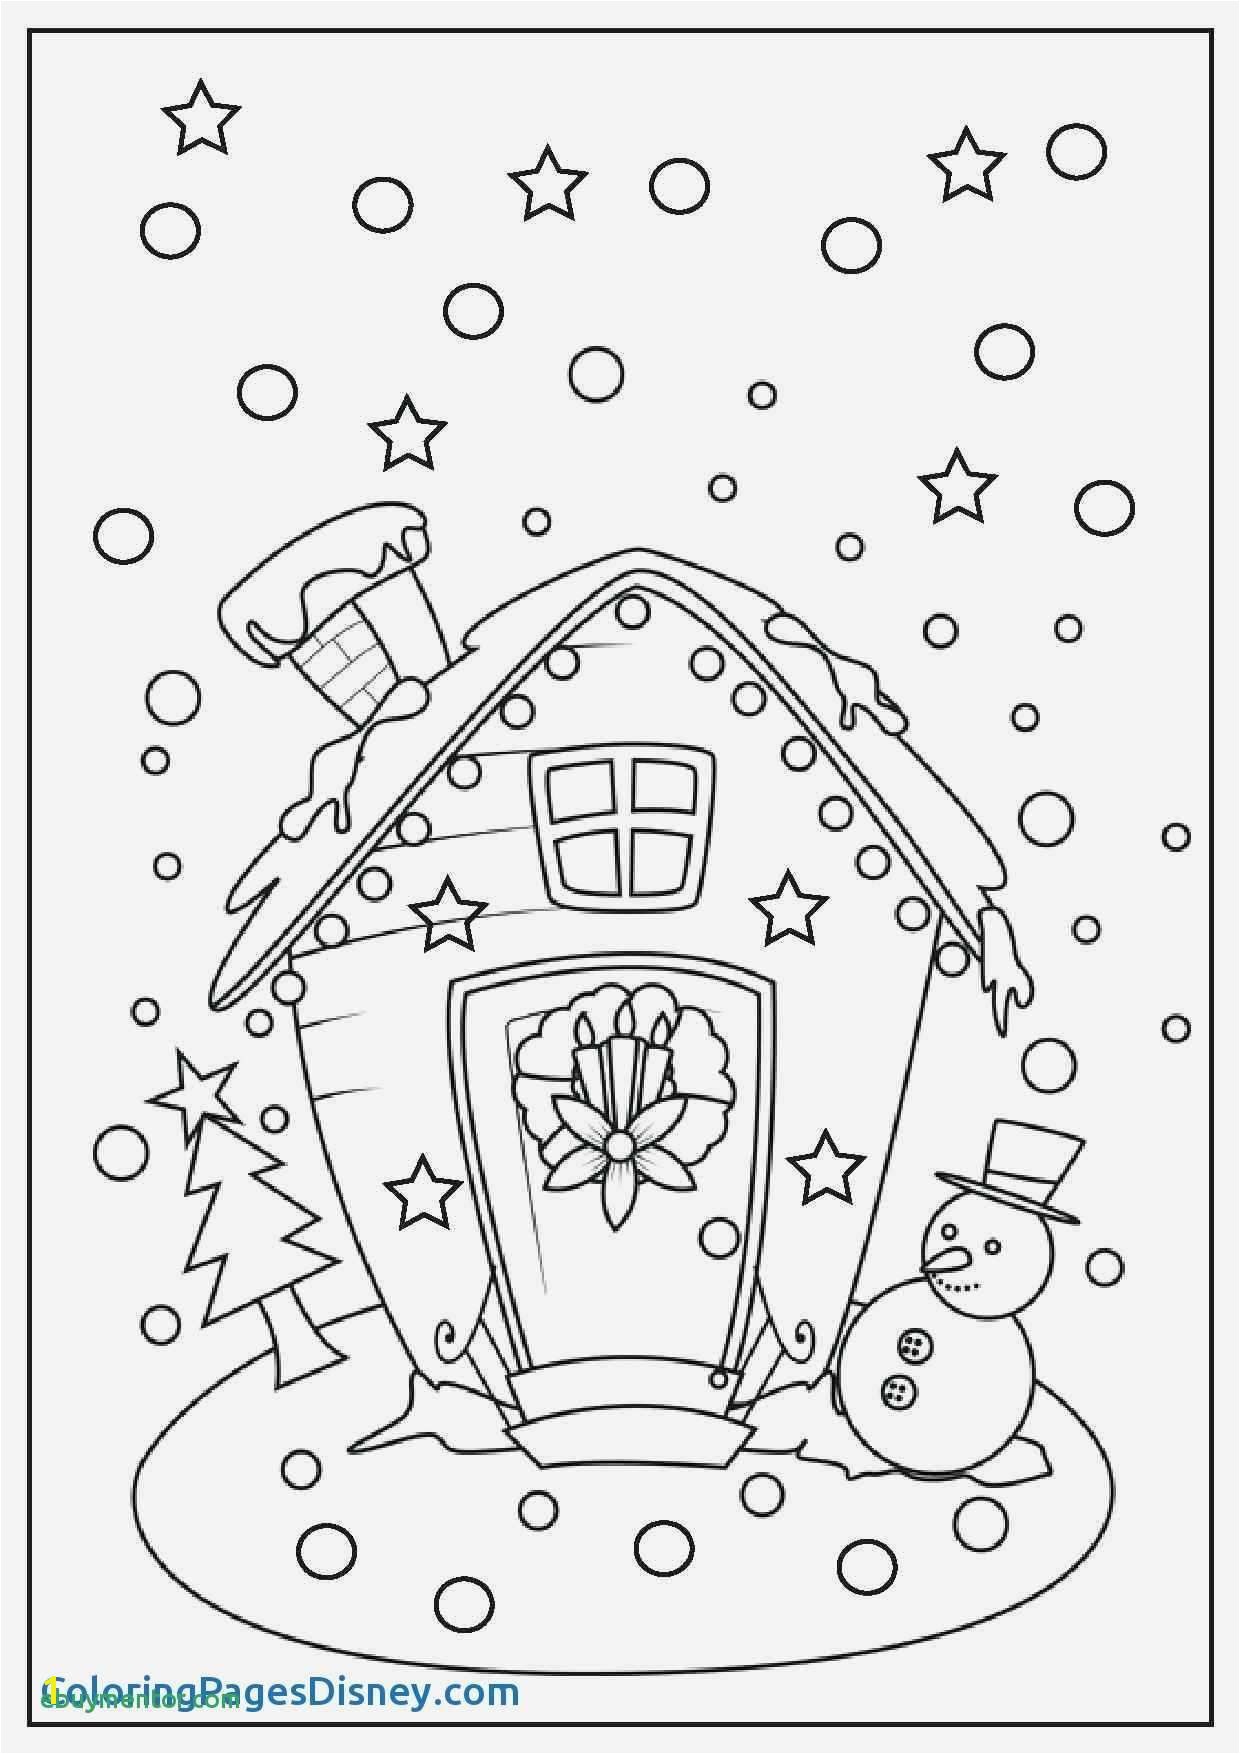 Free Kids Christmas Coloring Pages Free Christmas Coloring Pages for Kids Cool Coloring Printables 0d